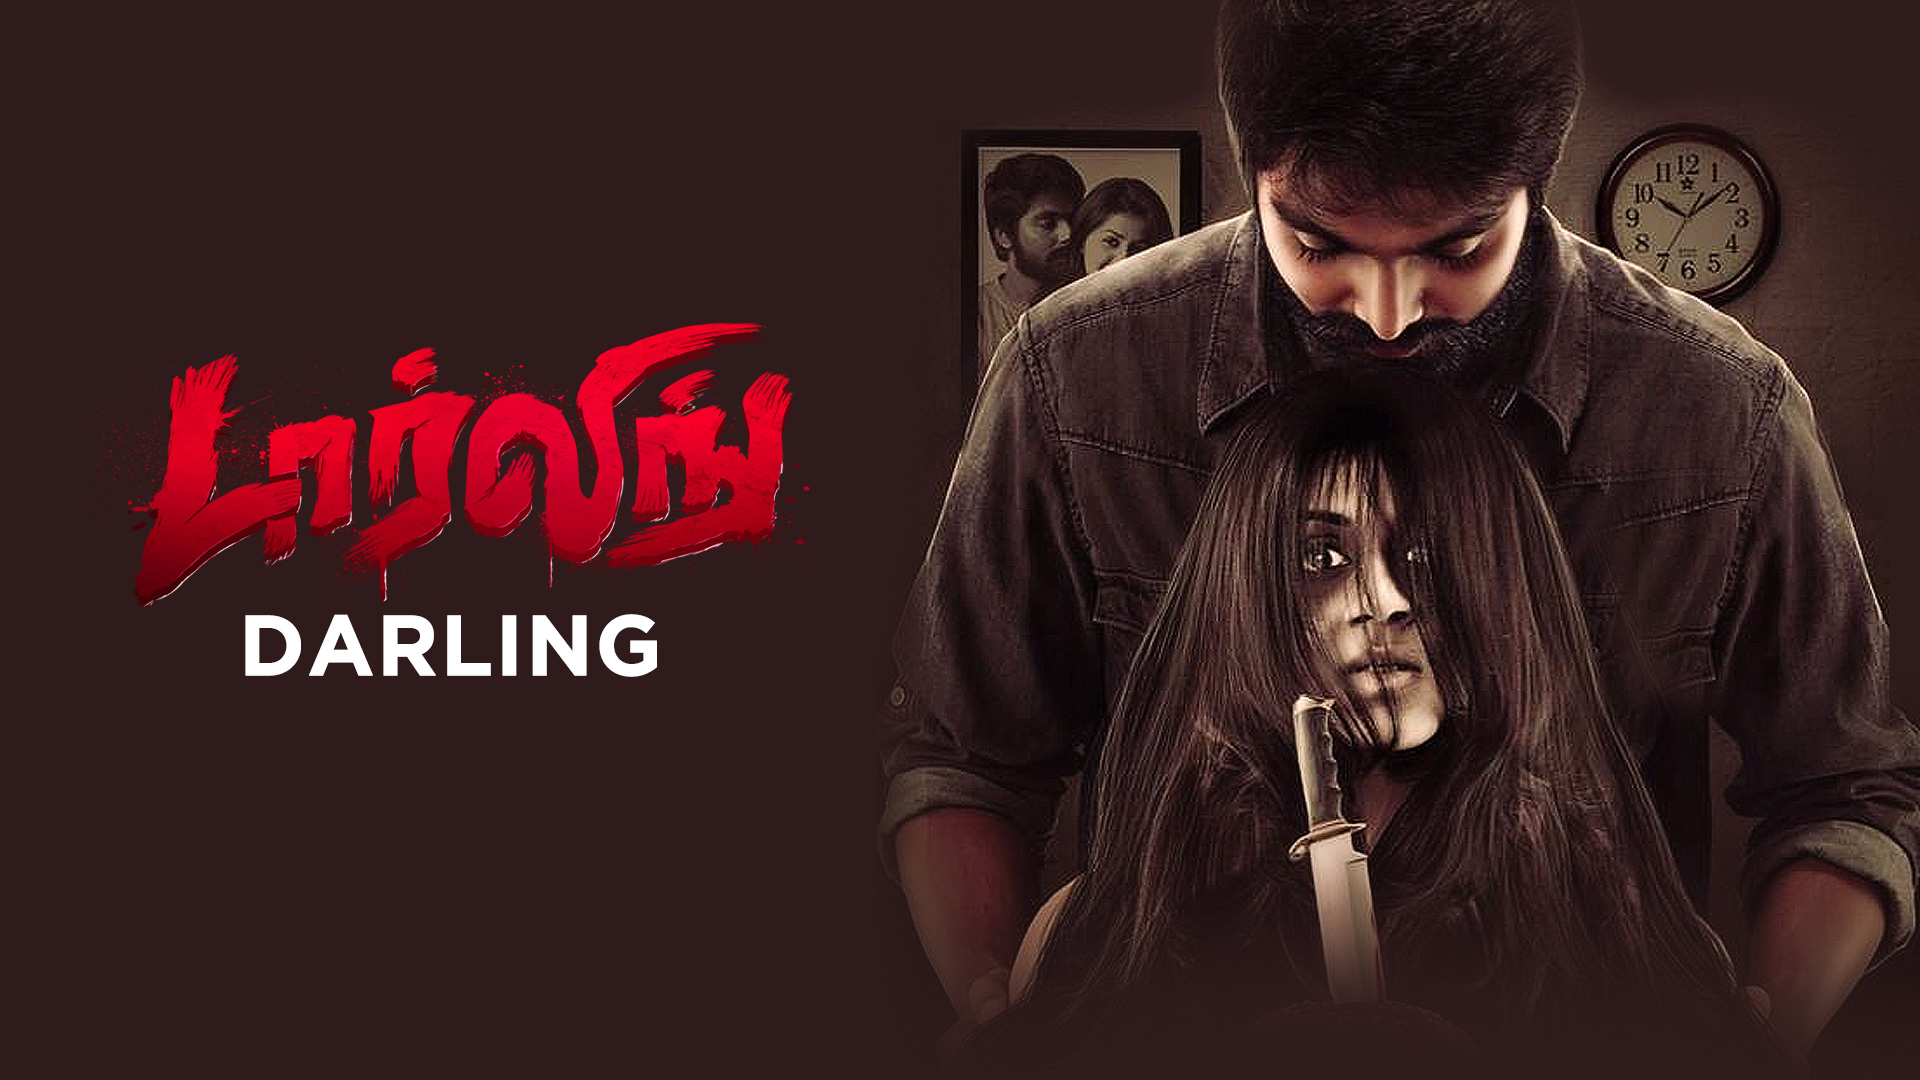 damian stuart recommends darling tamil movie online pic